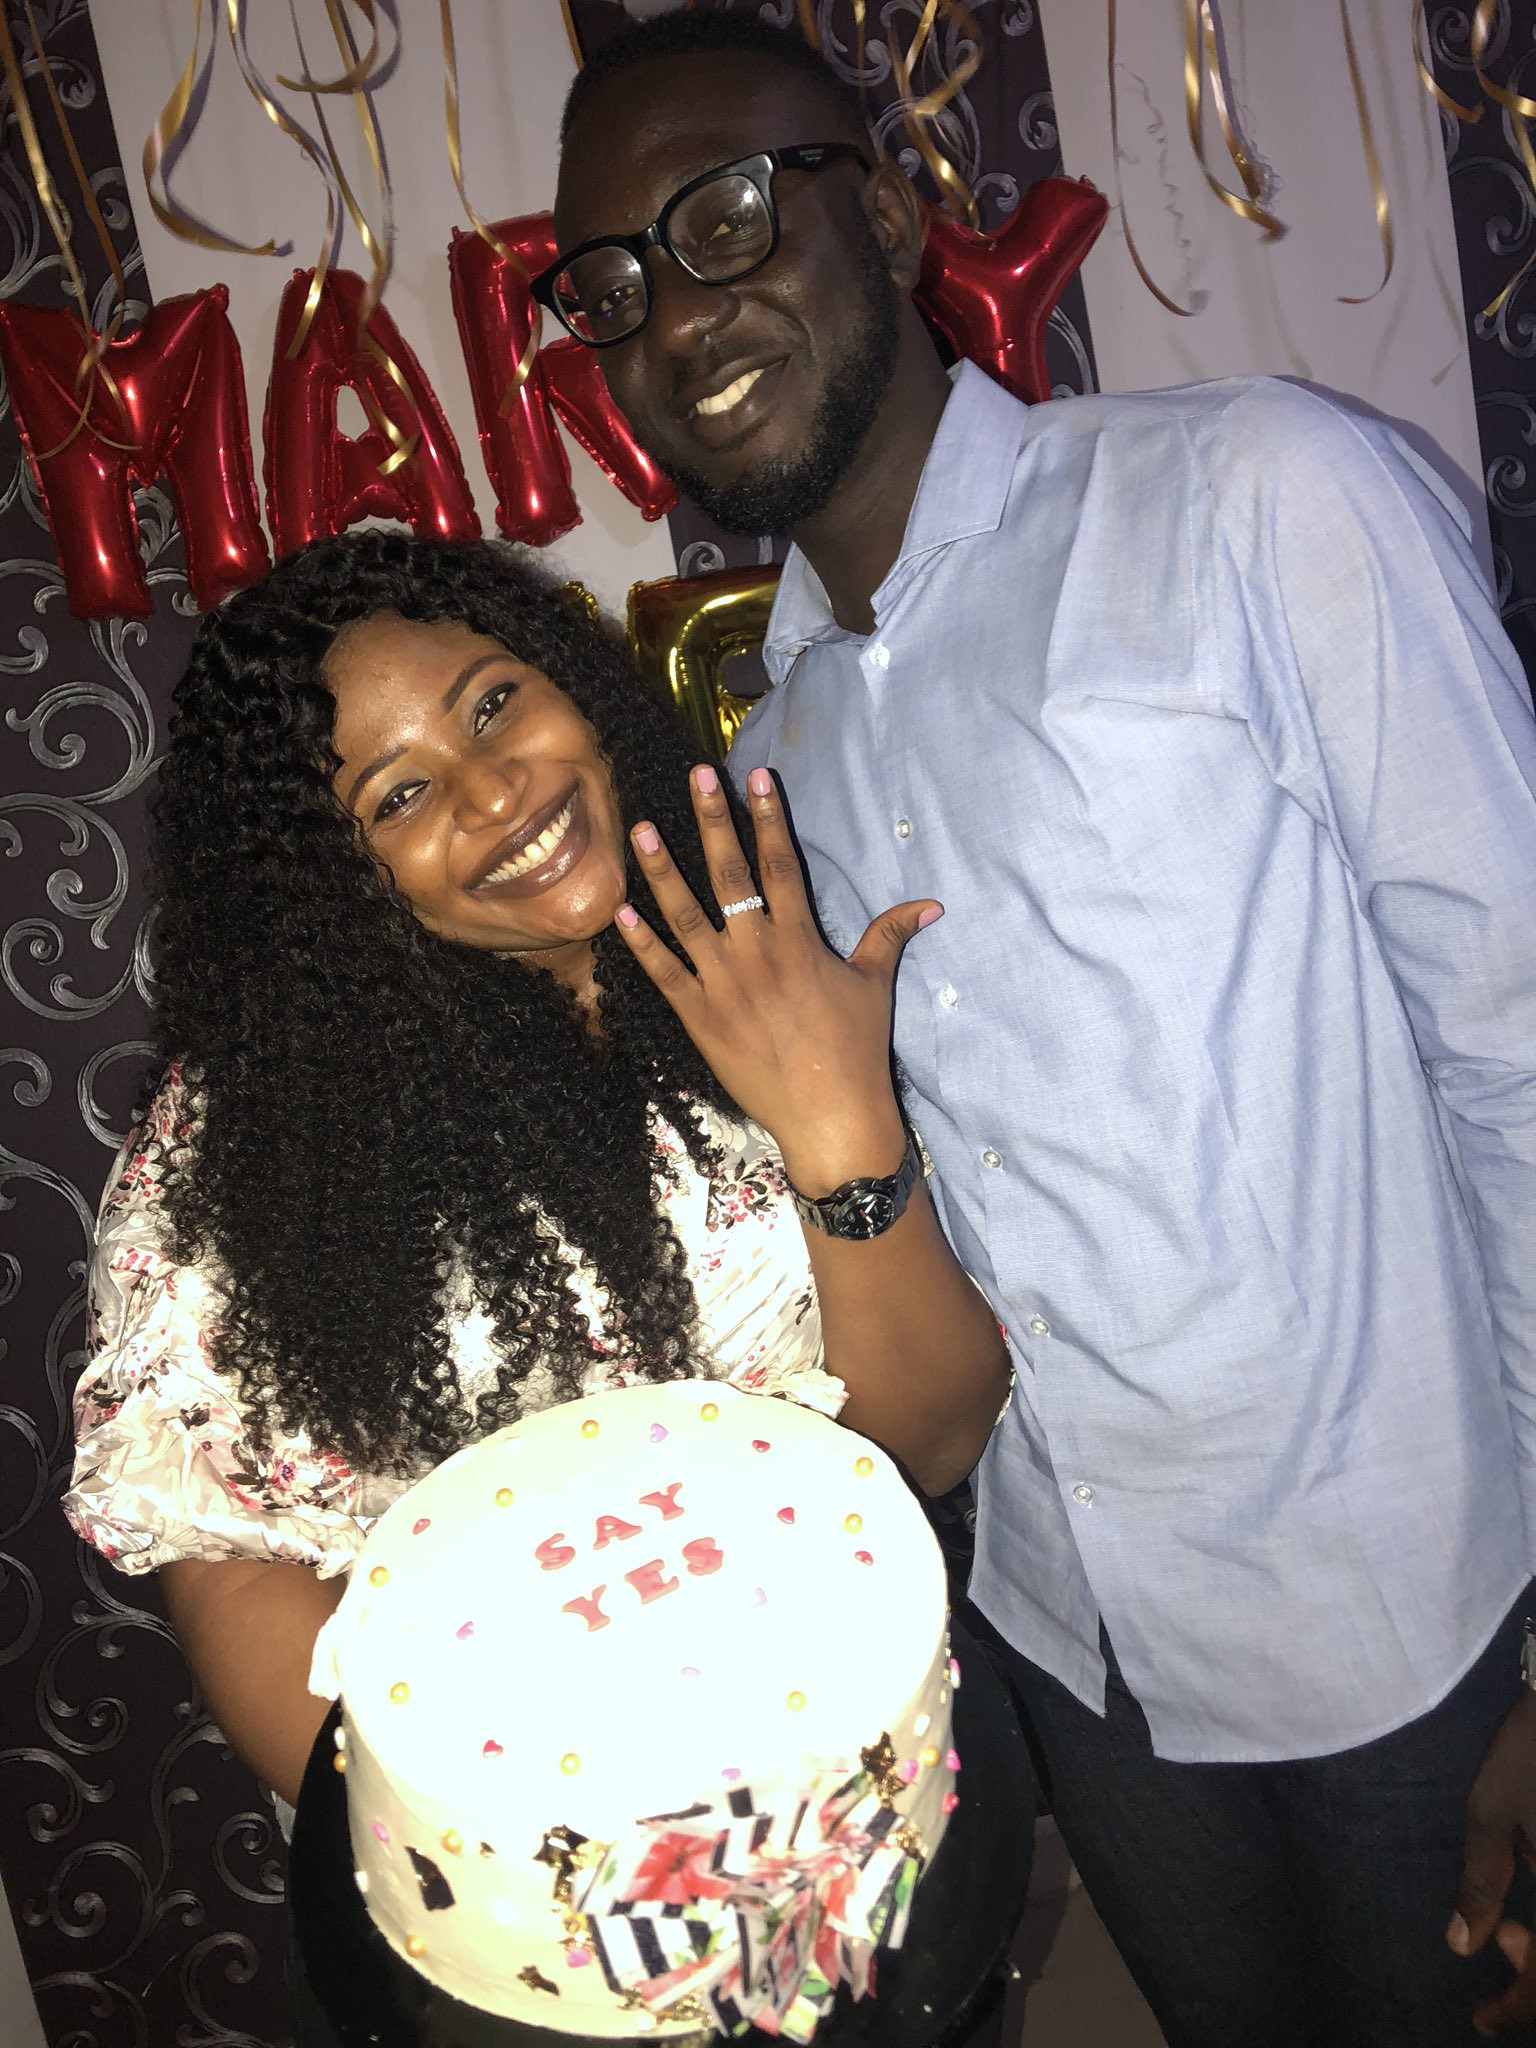 The couple got engaged 2 years after meeting on Twitter